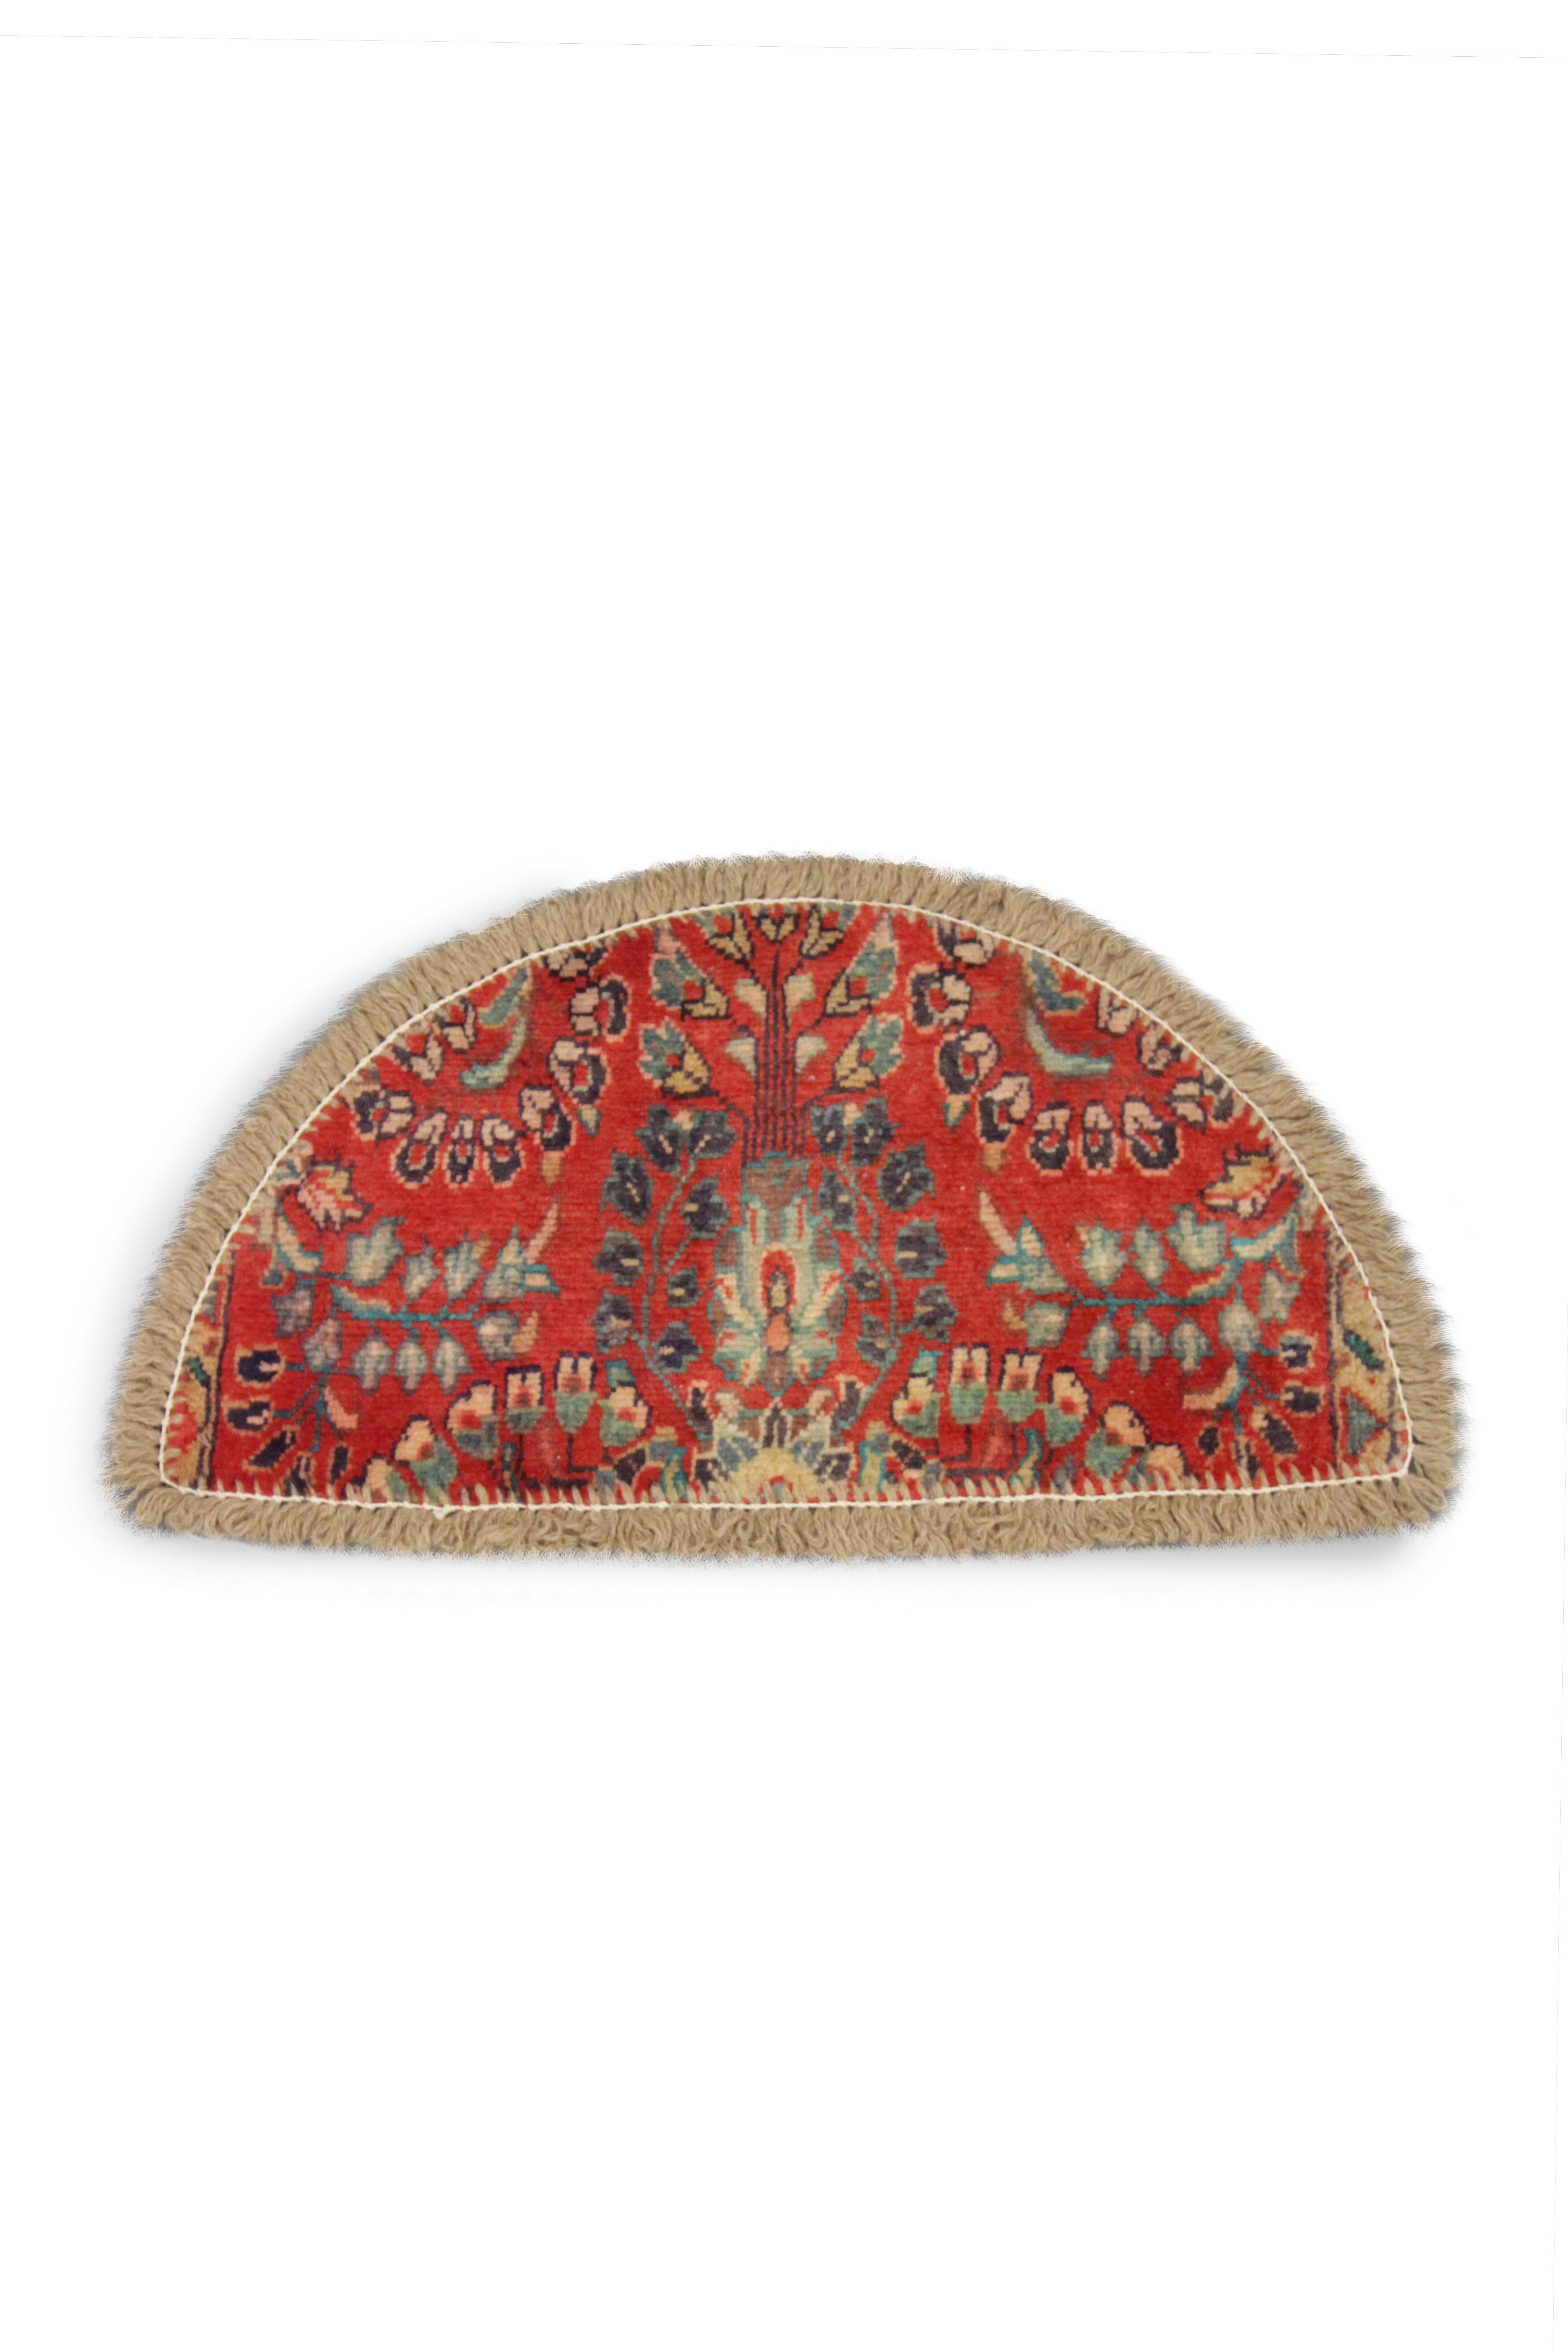 Handmade carpet stunning orange/red drenches the background on this little Oriental rug, contrasting with the intricate floral details which have been woven in deep blue and green symmetrical patterns. This semicircle entranceway doormat has been